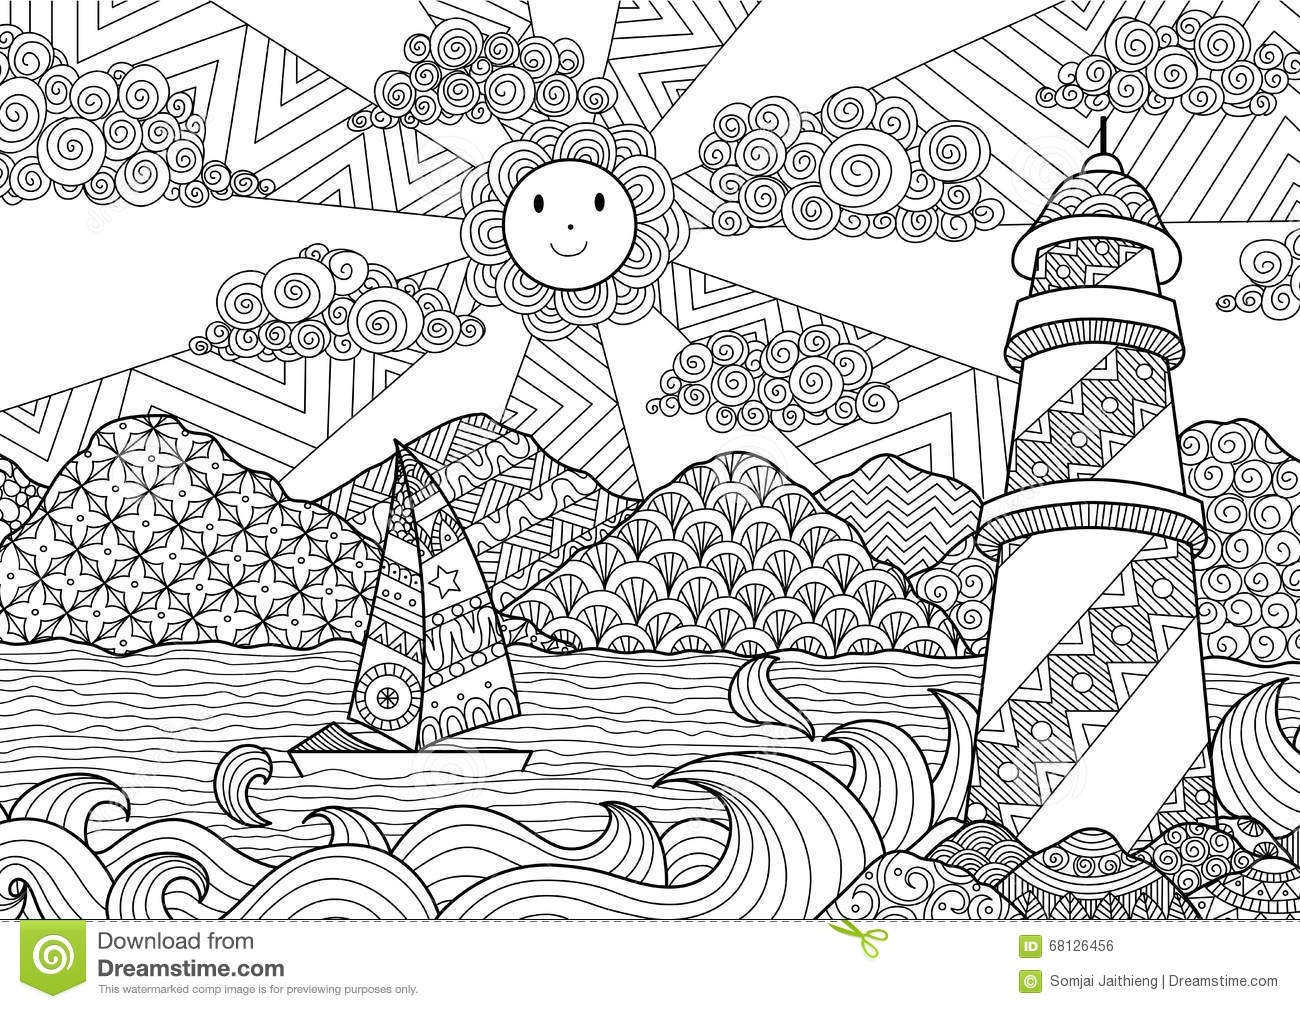 Anti Anxiety Coloring Book
 Seascape Line Art Design For Coloring Book For Adult Anti